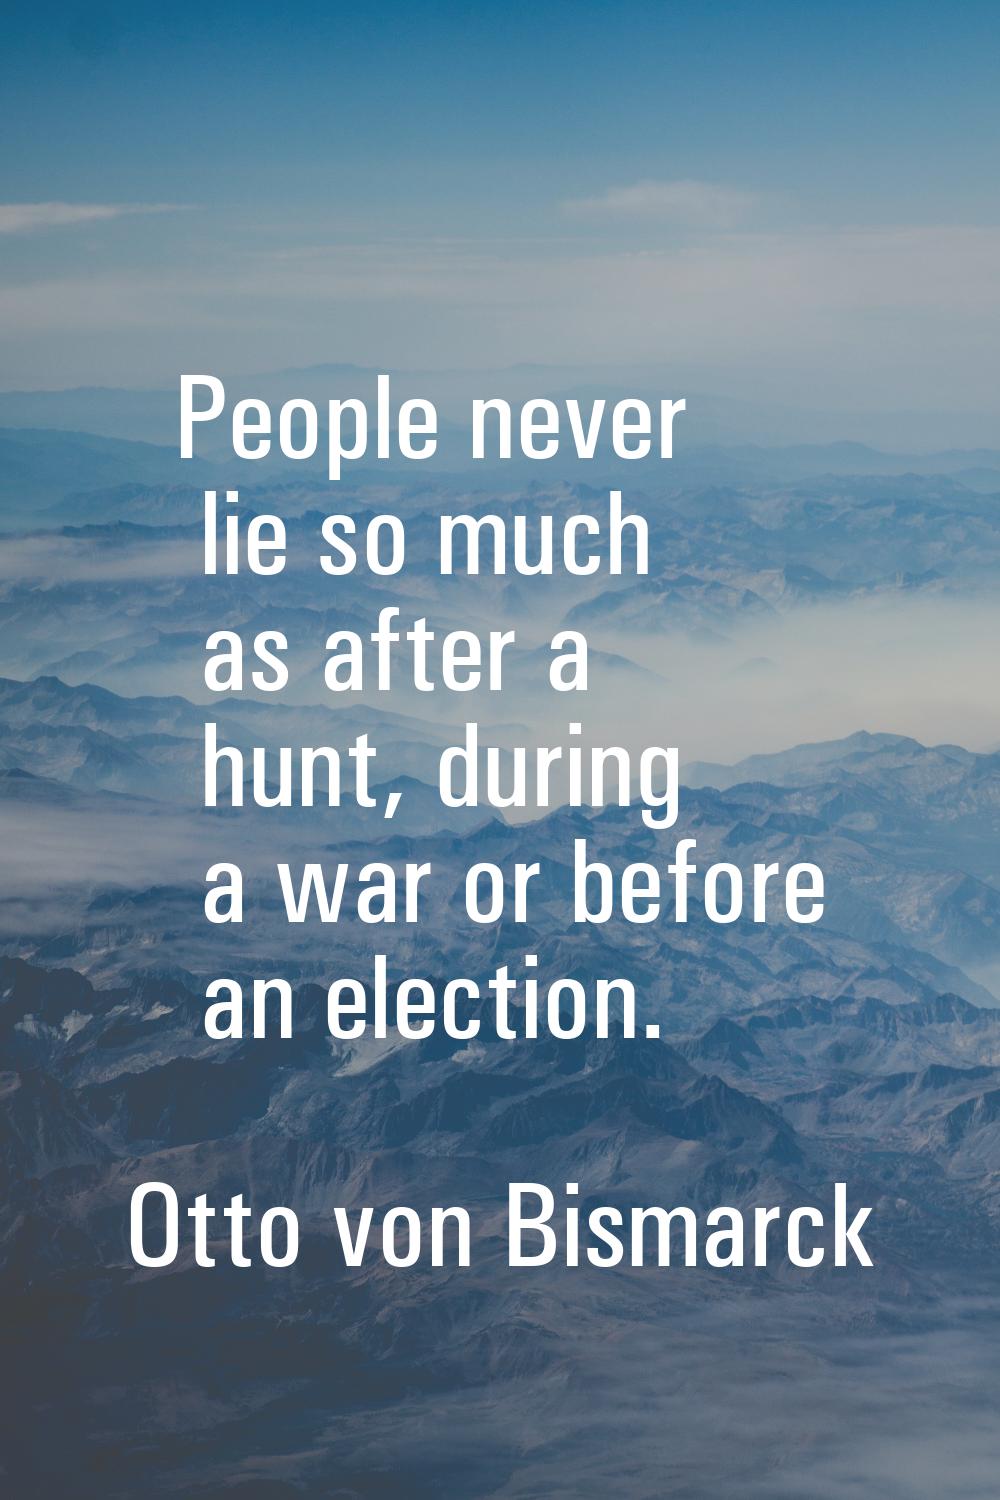 People never lie so much as after a hunt, during a war or before an election.